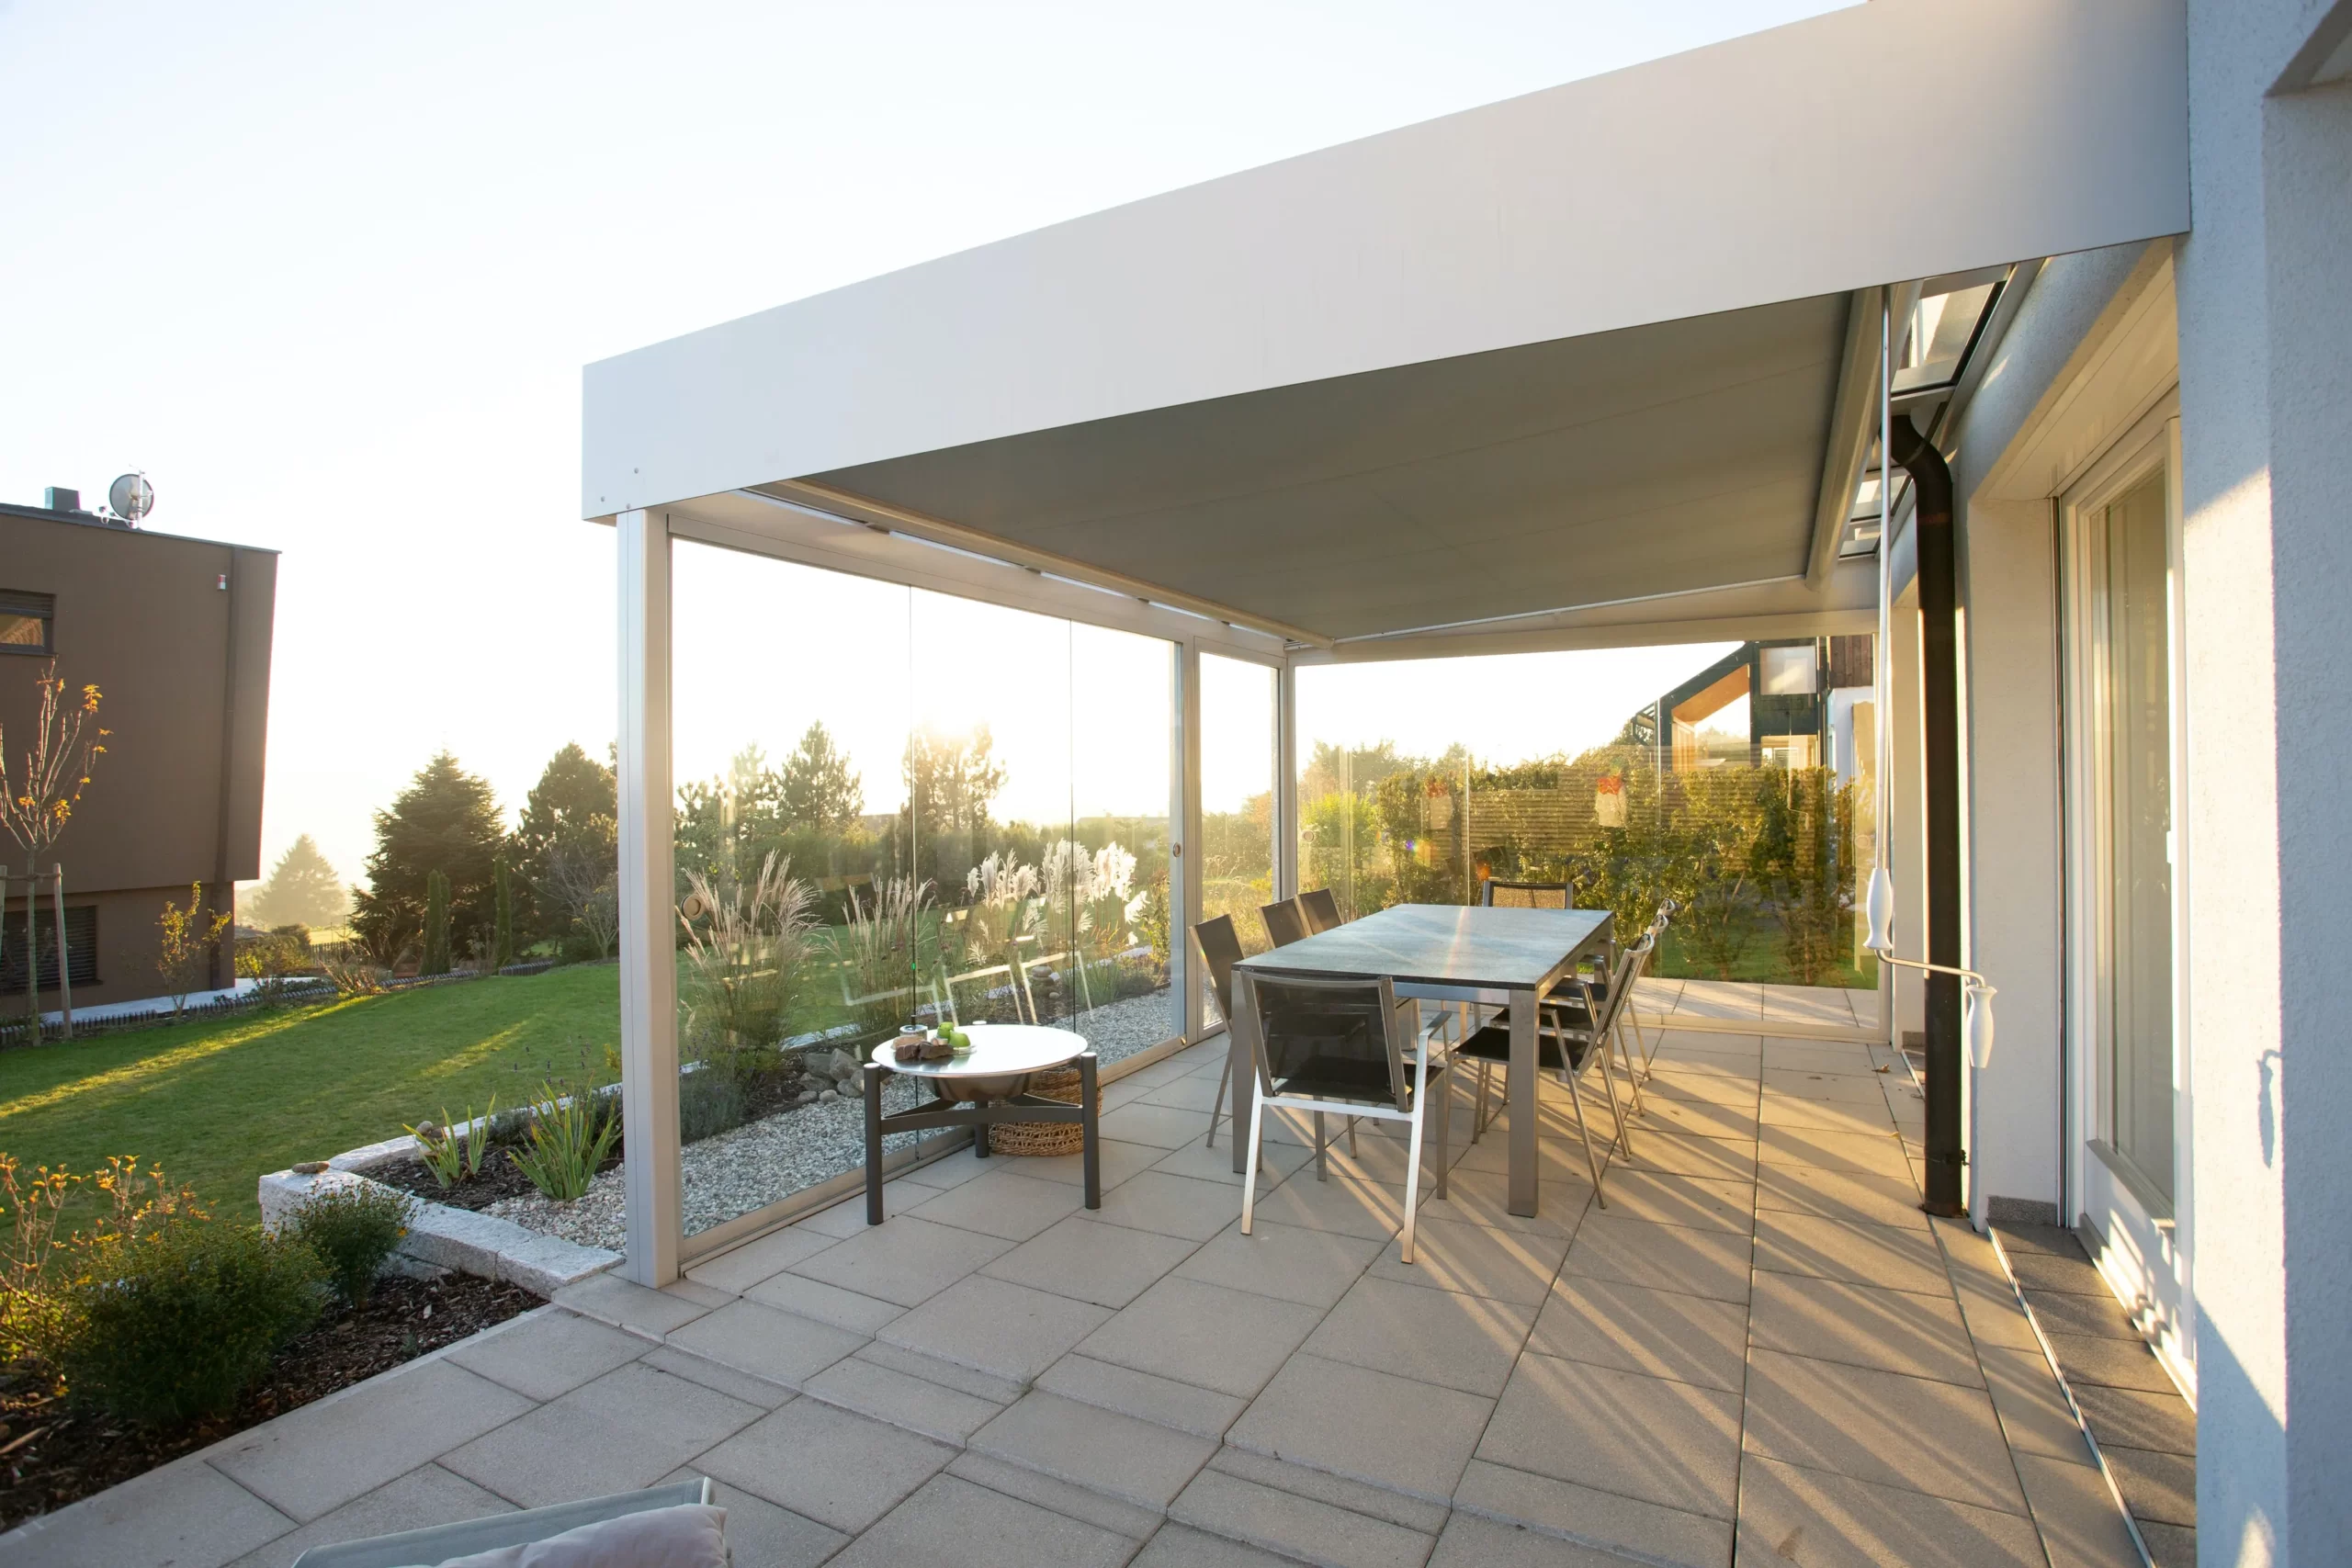 You are currently viewing Installer une pergola et réglementation